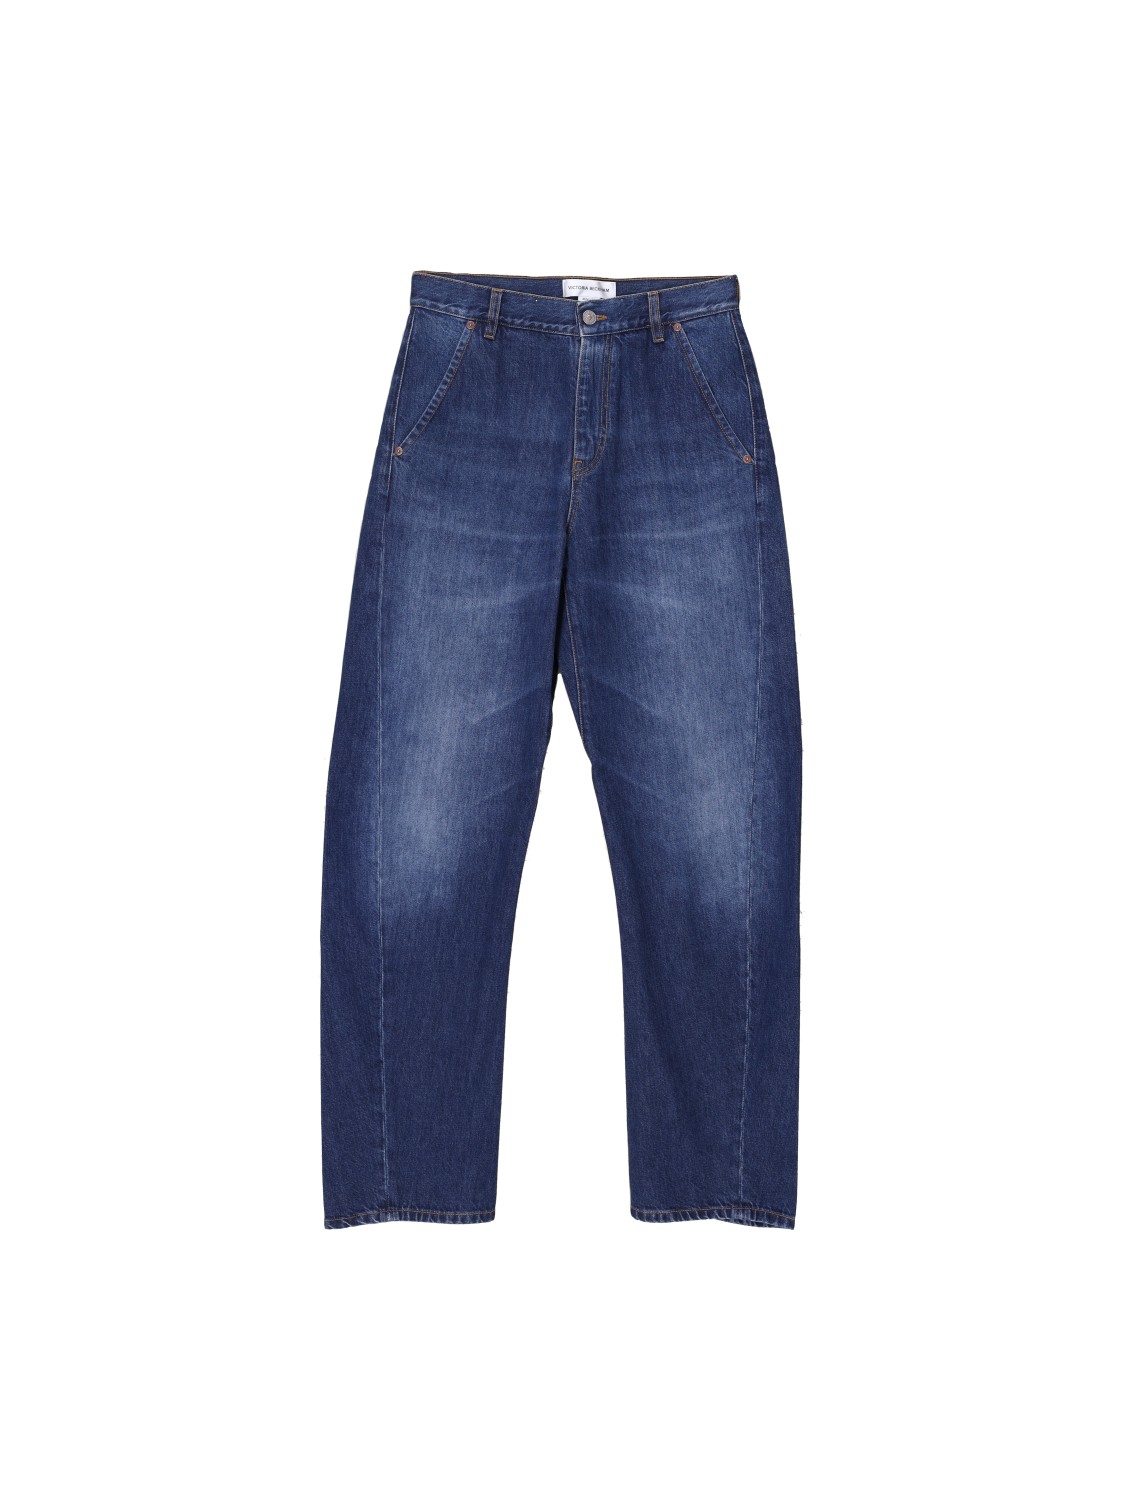 Victoria Beckham Cotton baggy jeans with displaced seam  blue 25